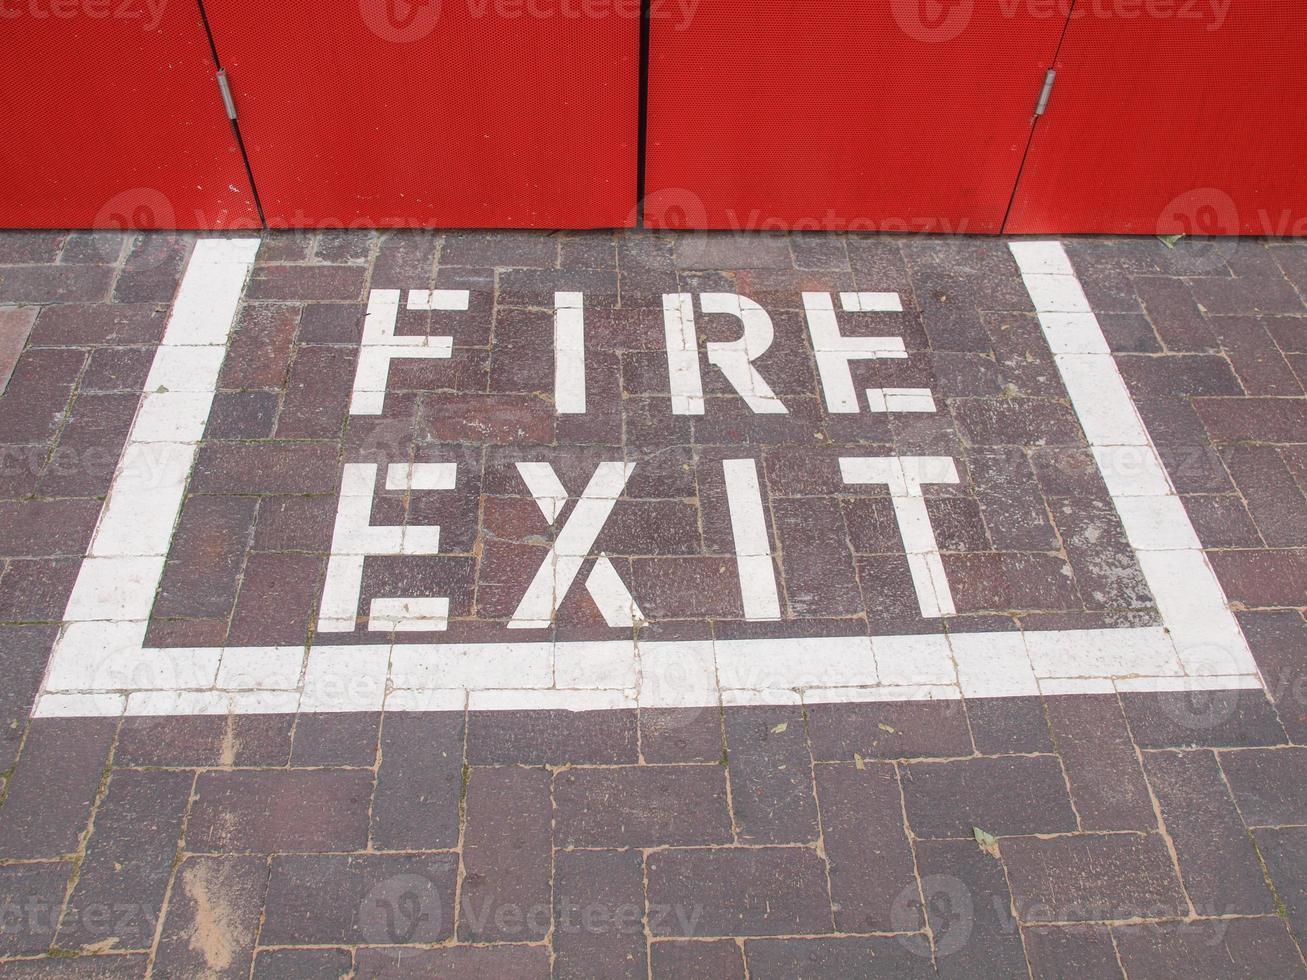 Fire exit sign photo